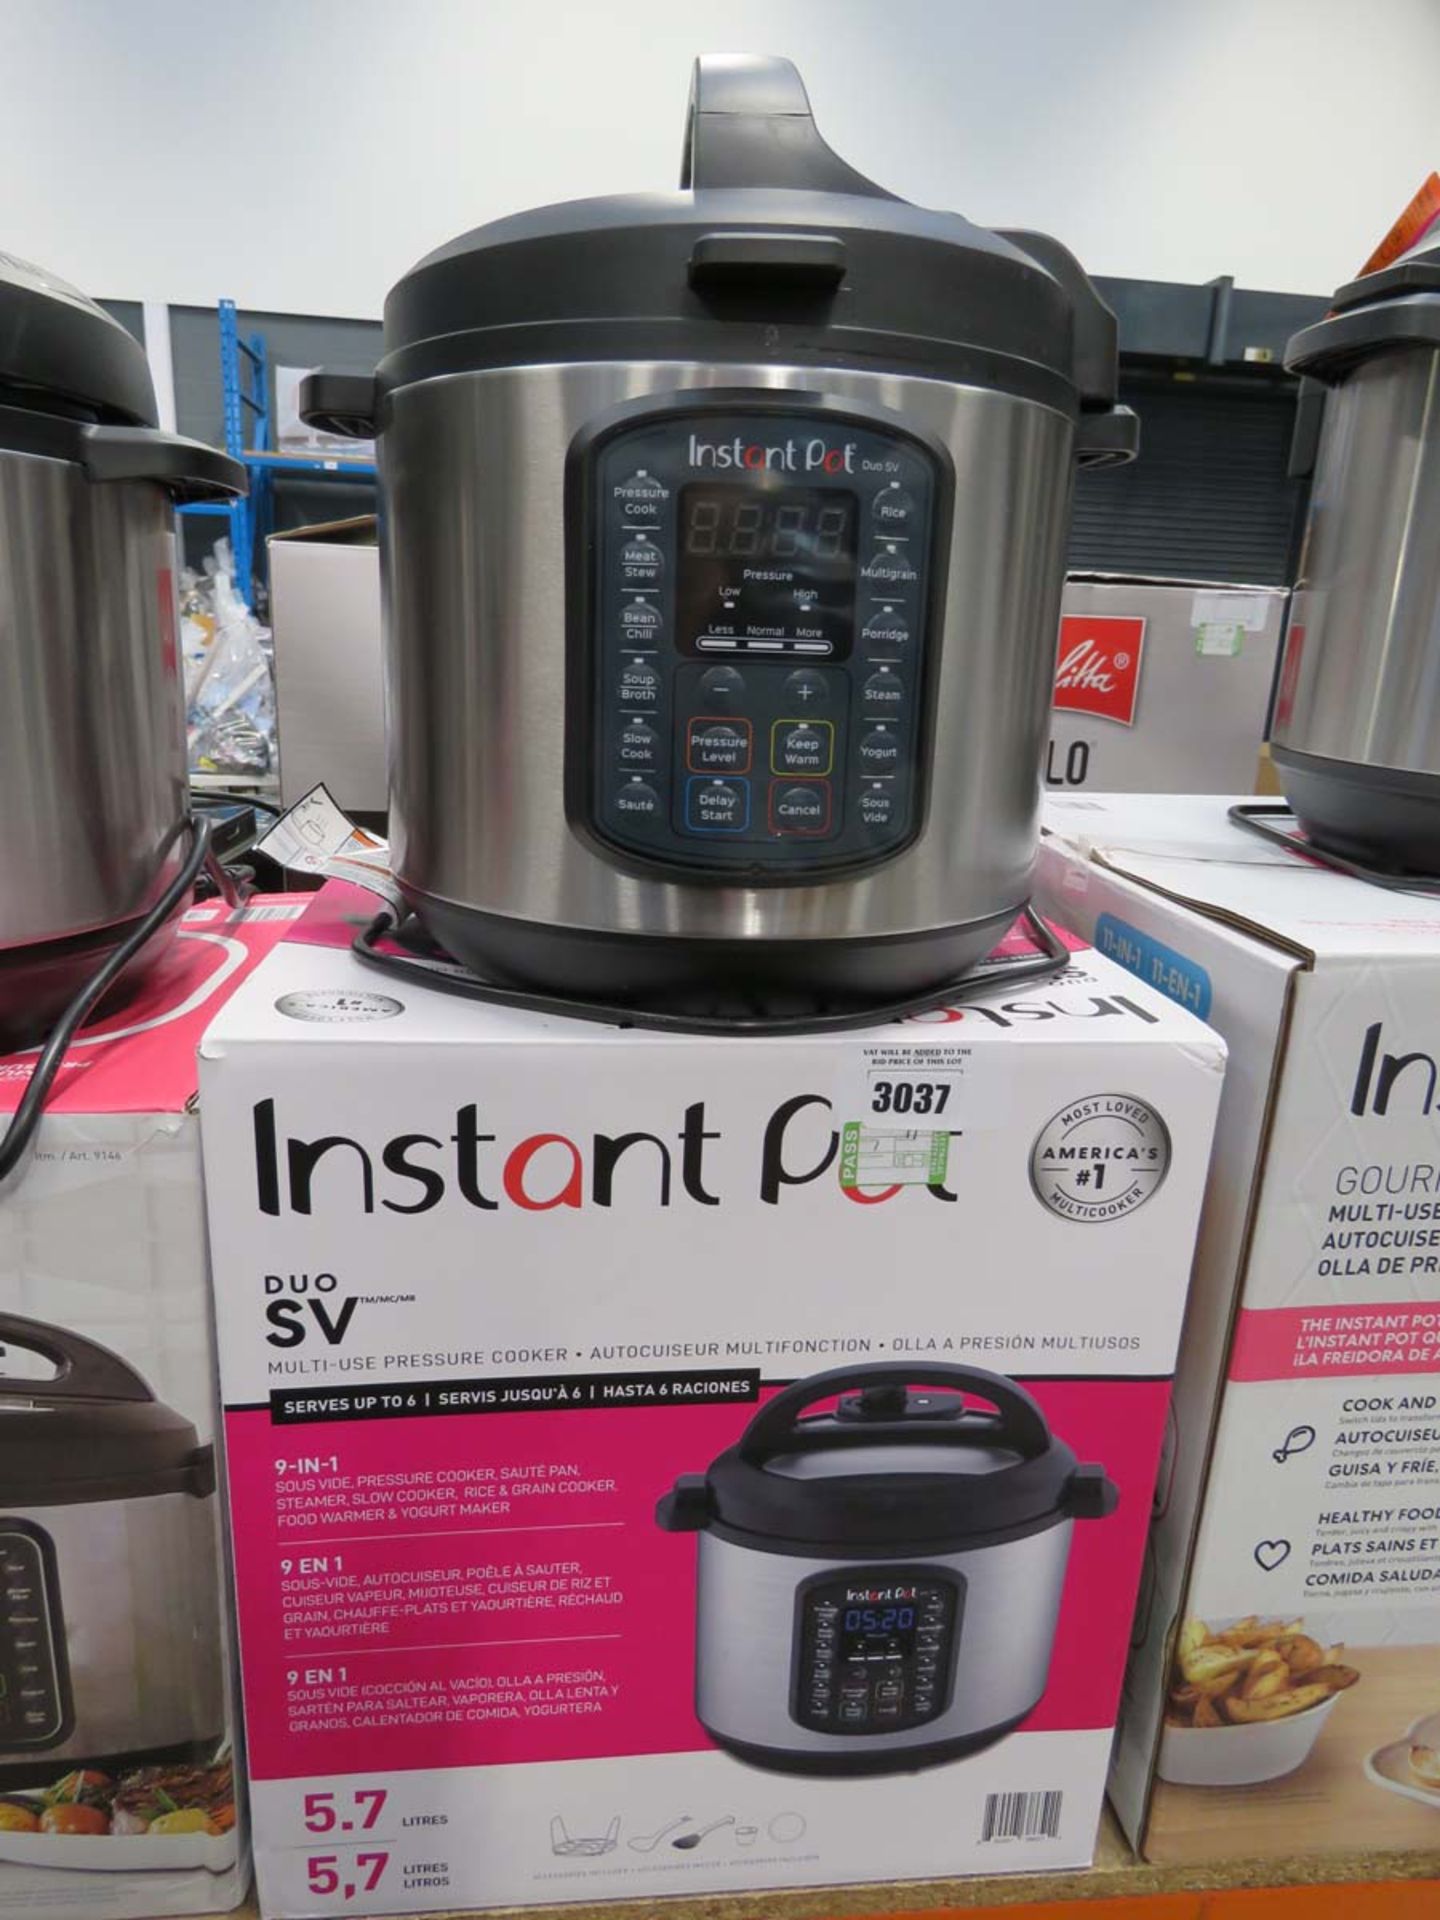 (11) Instant Pot multi use pressure cooker with box